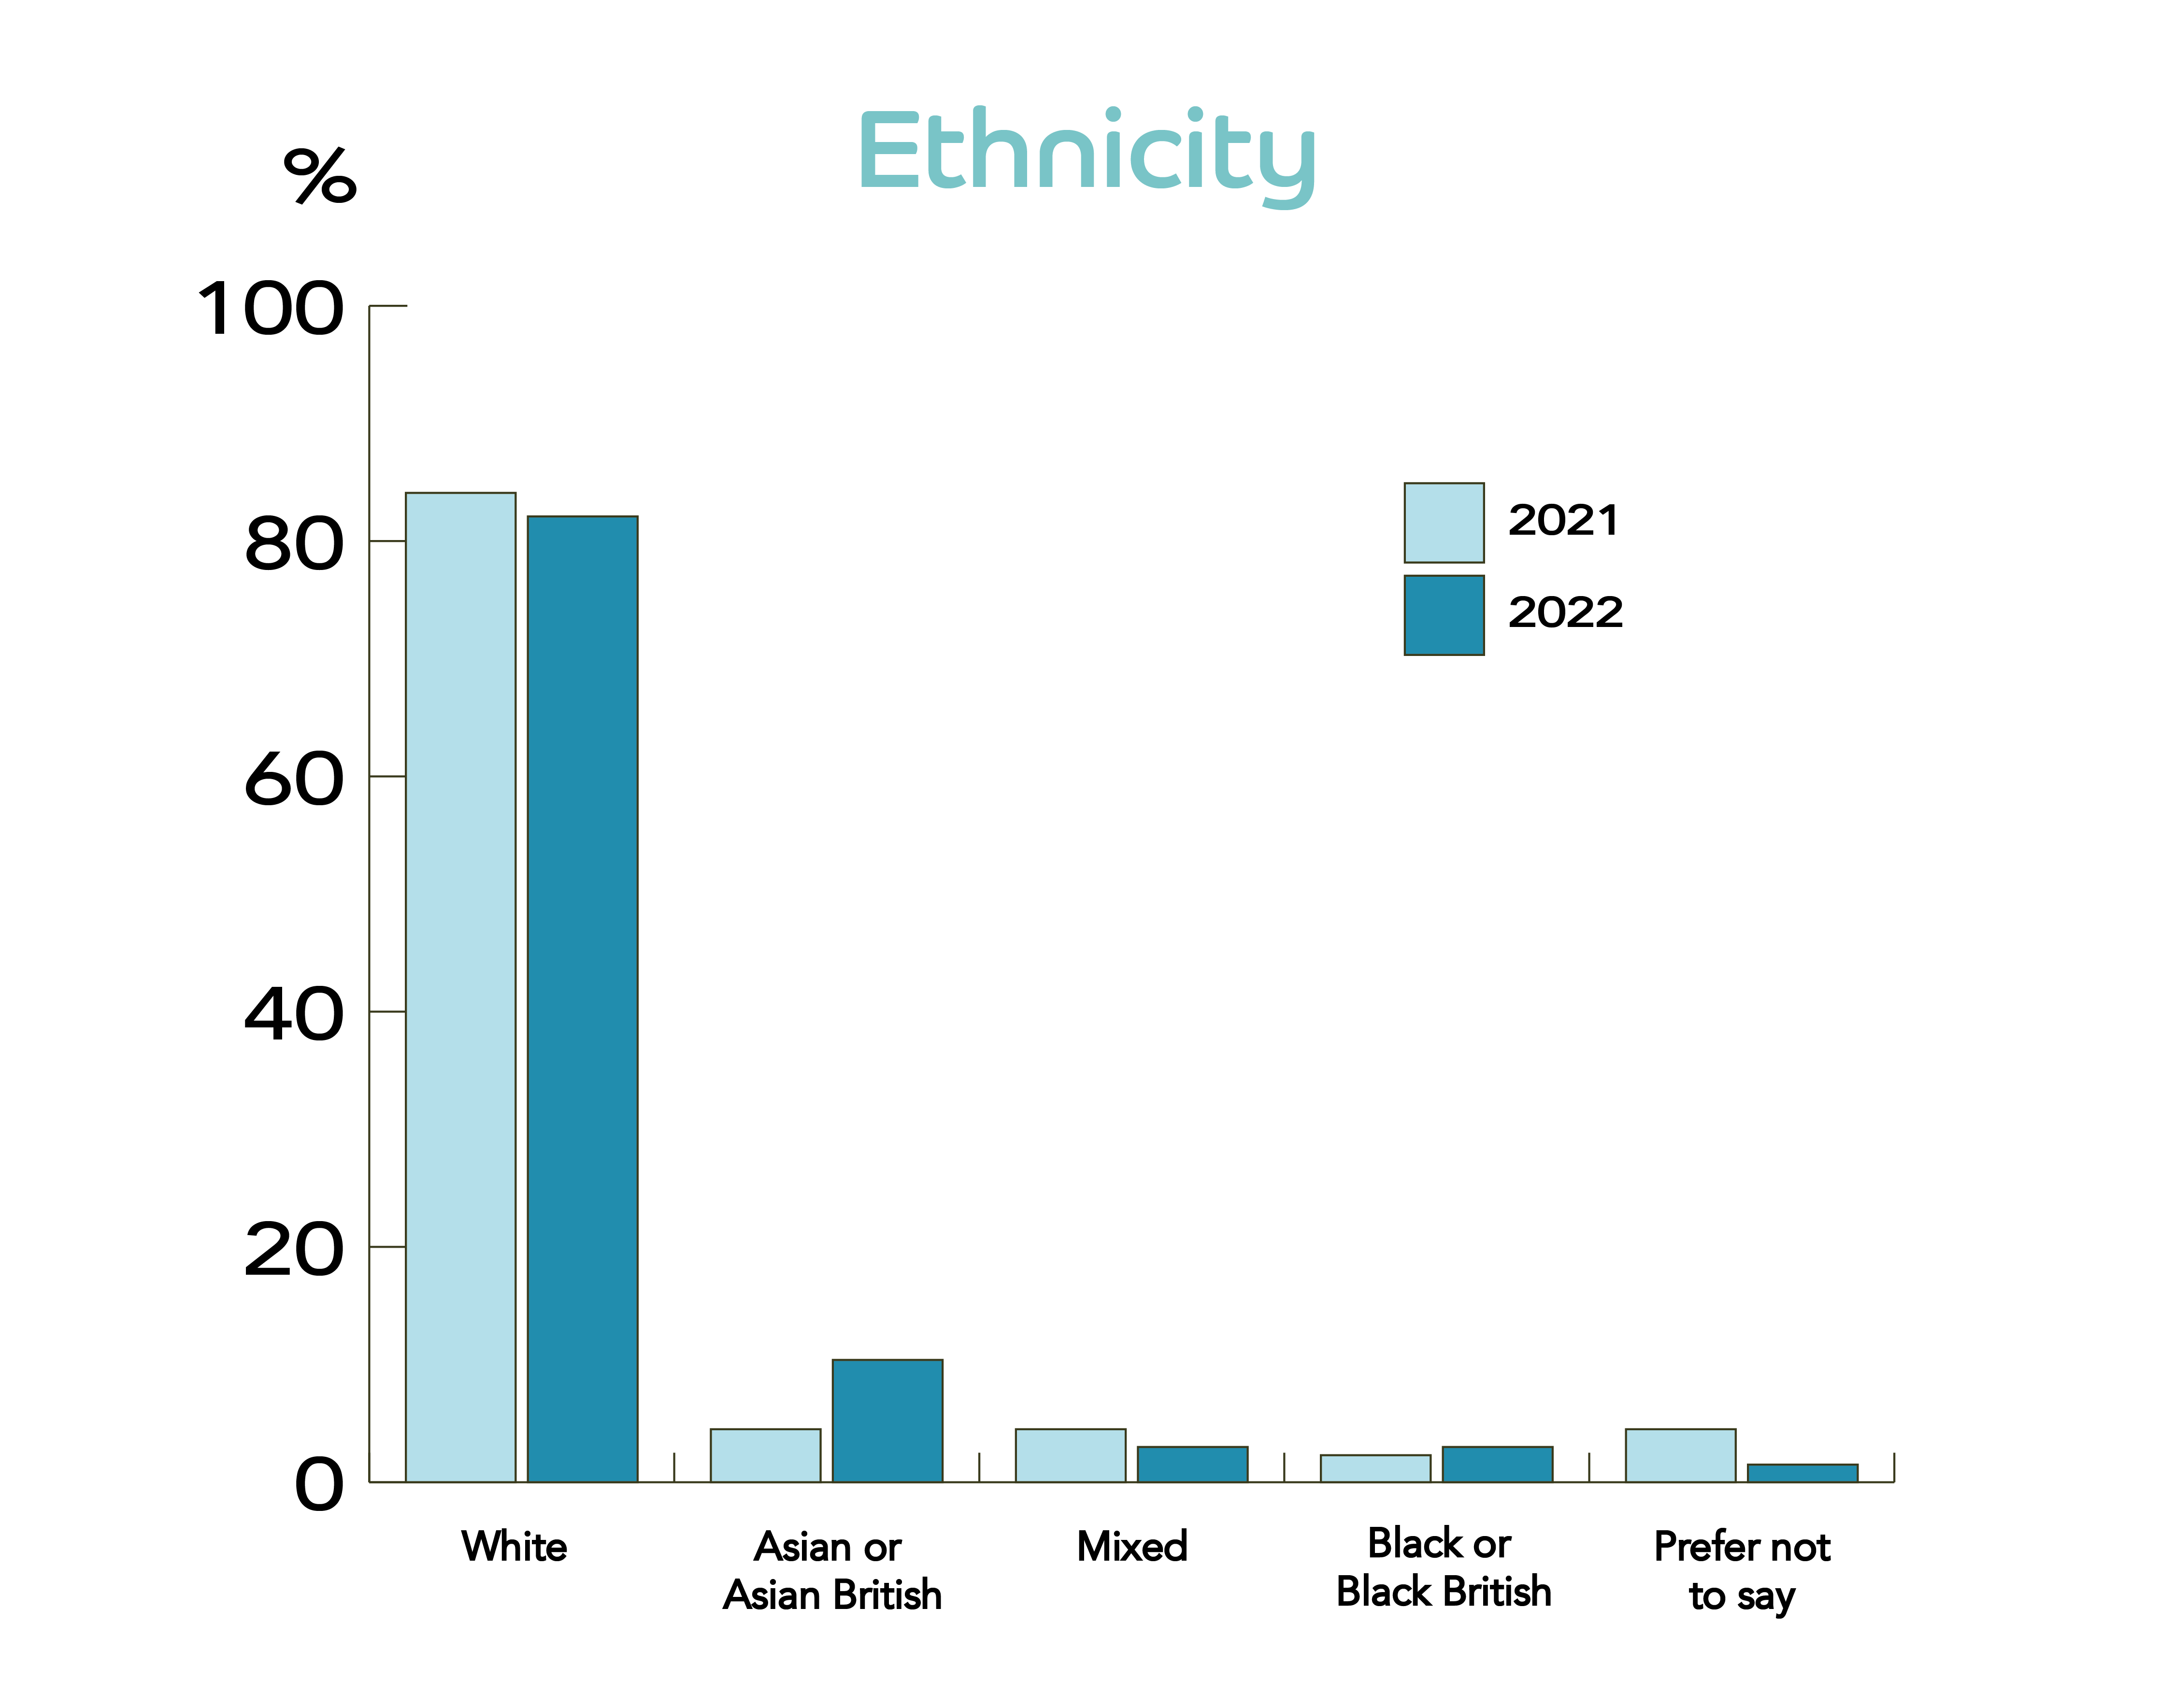 Bar chart showing survey responses to 'Ethnicity'